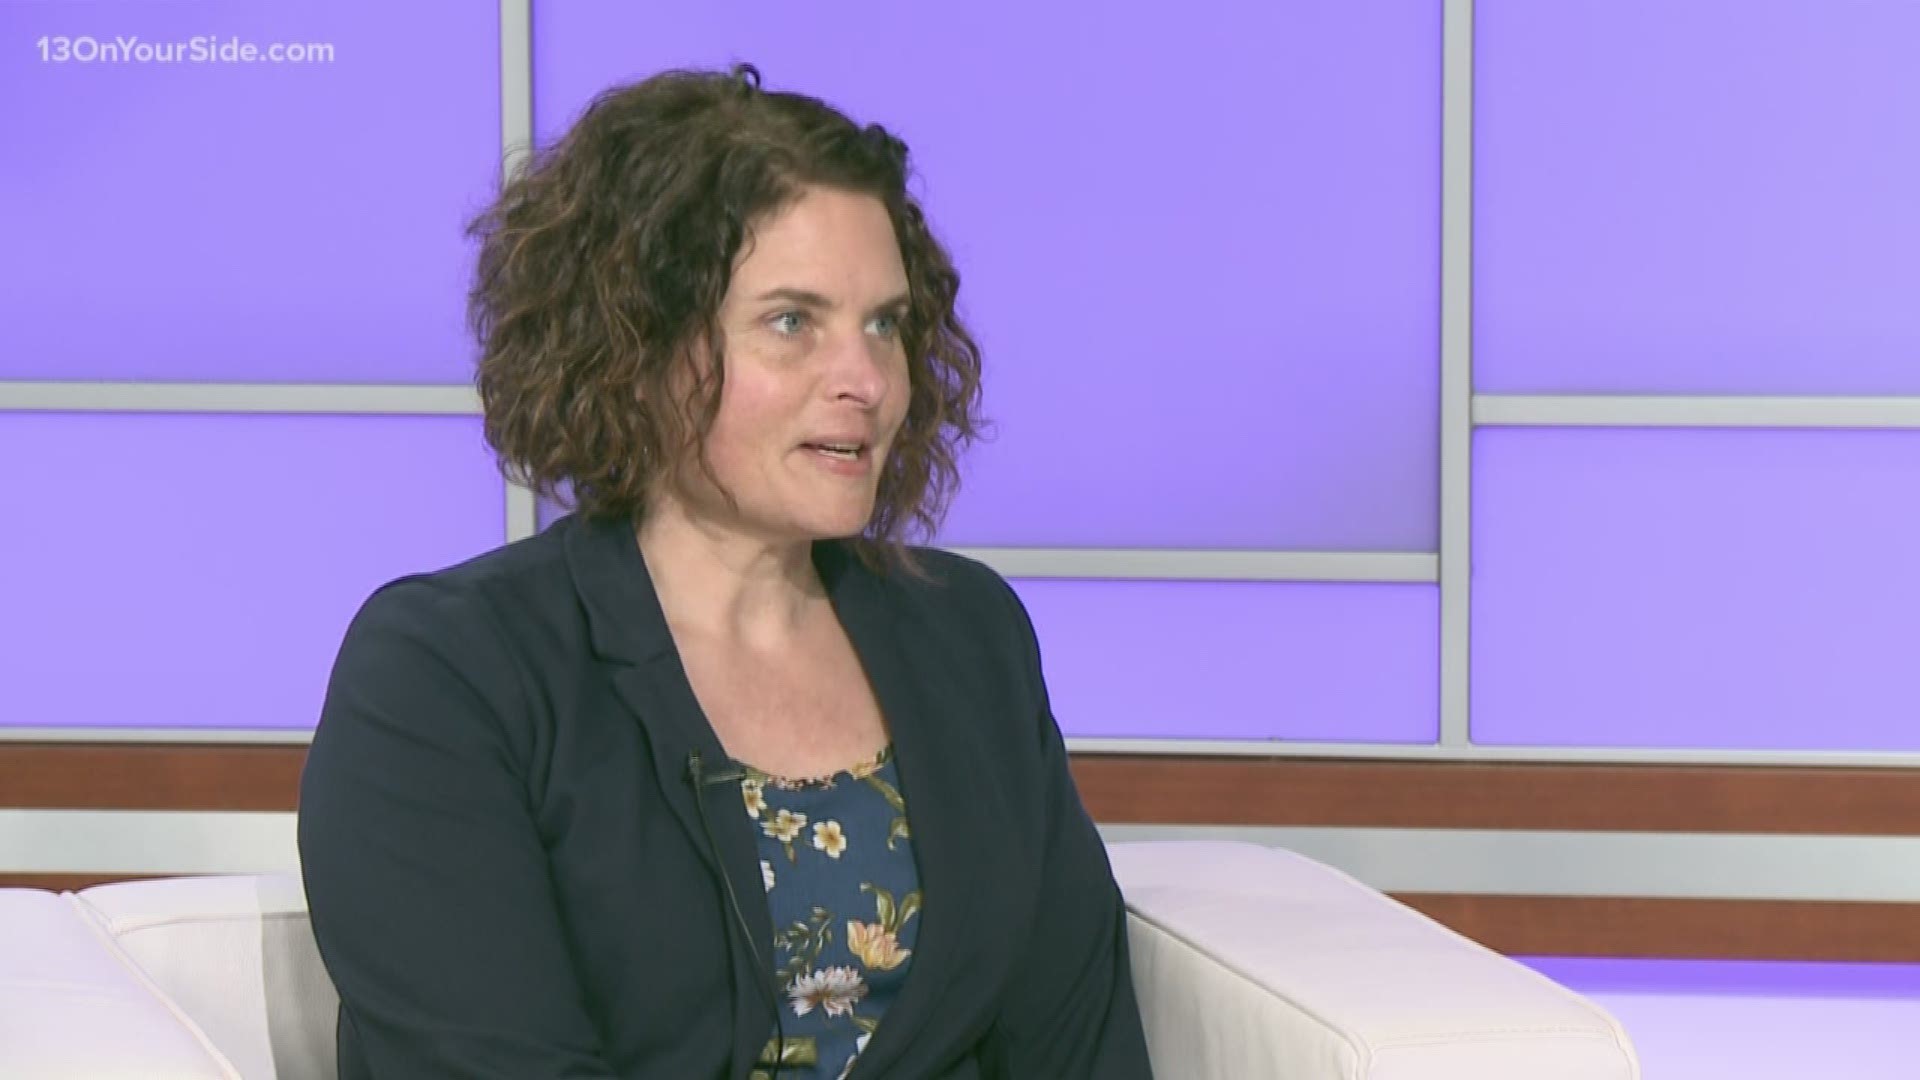 Melissa Werkman, the executive director of the center, is encouraging parents to trust and verify caregivers as much as possible.